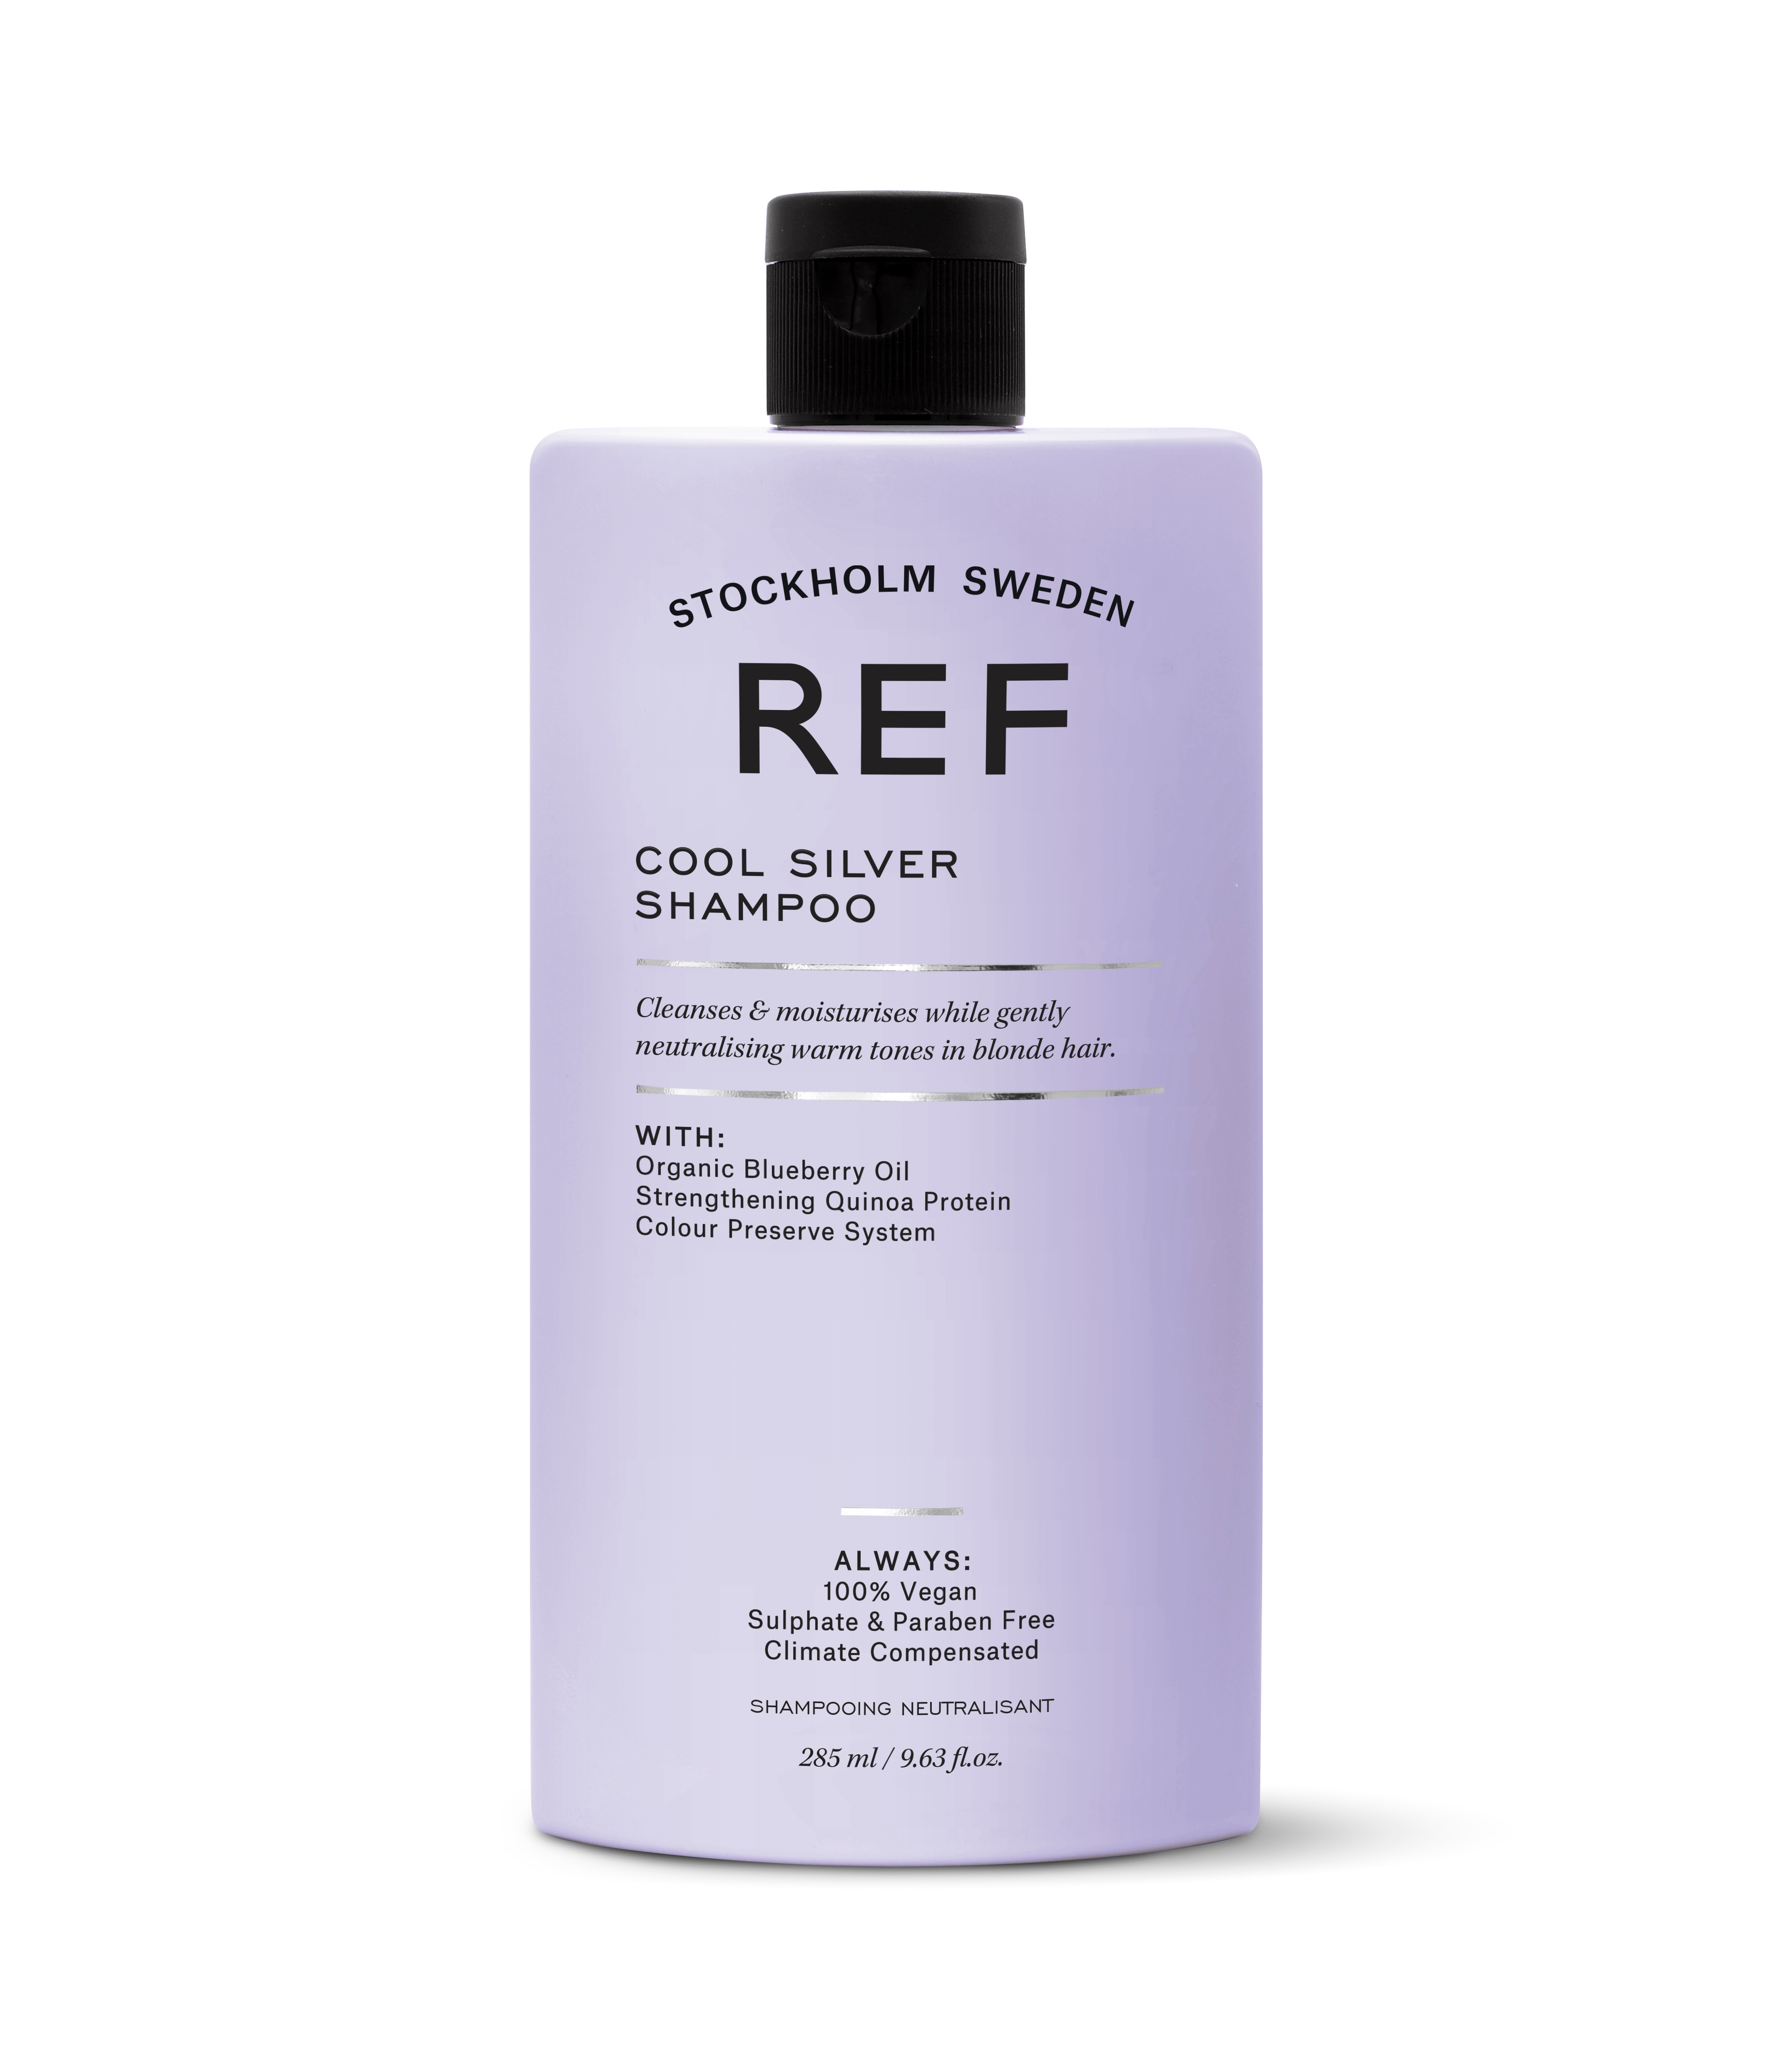 Product image from REF Shampoo - Cool Silver Shampoo